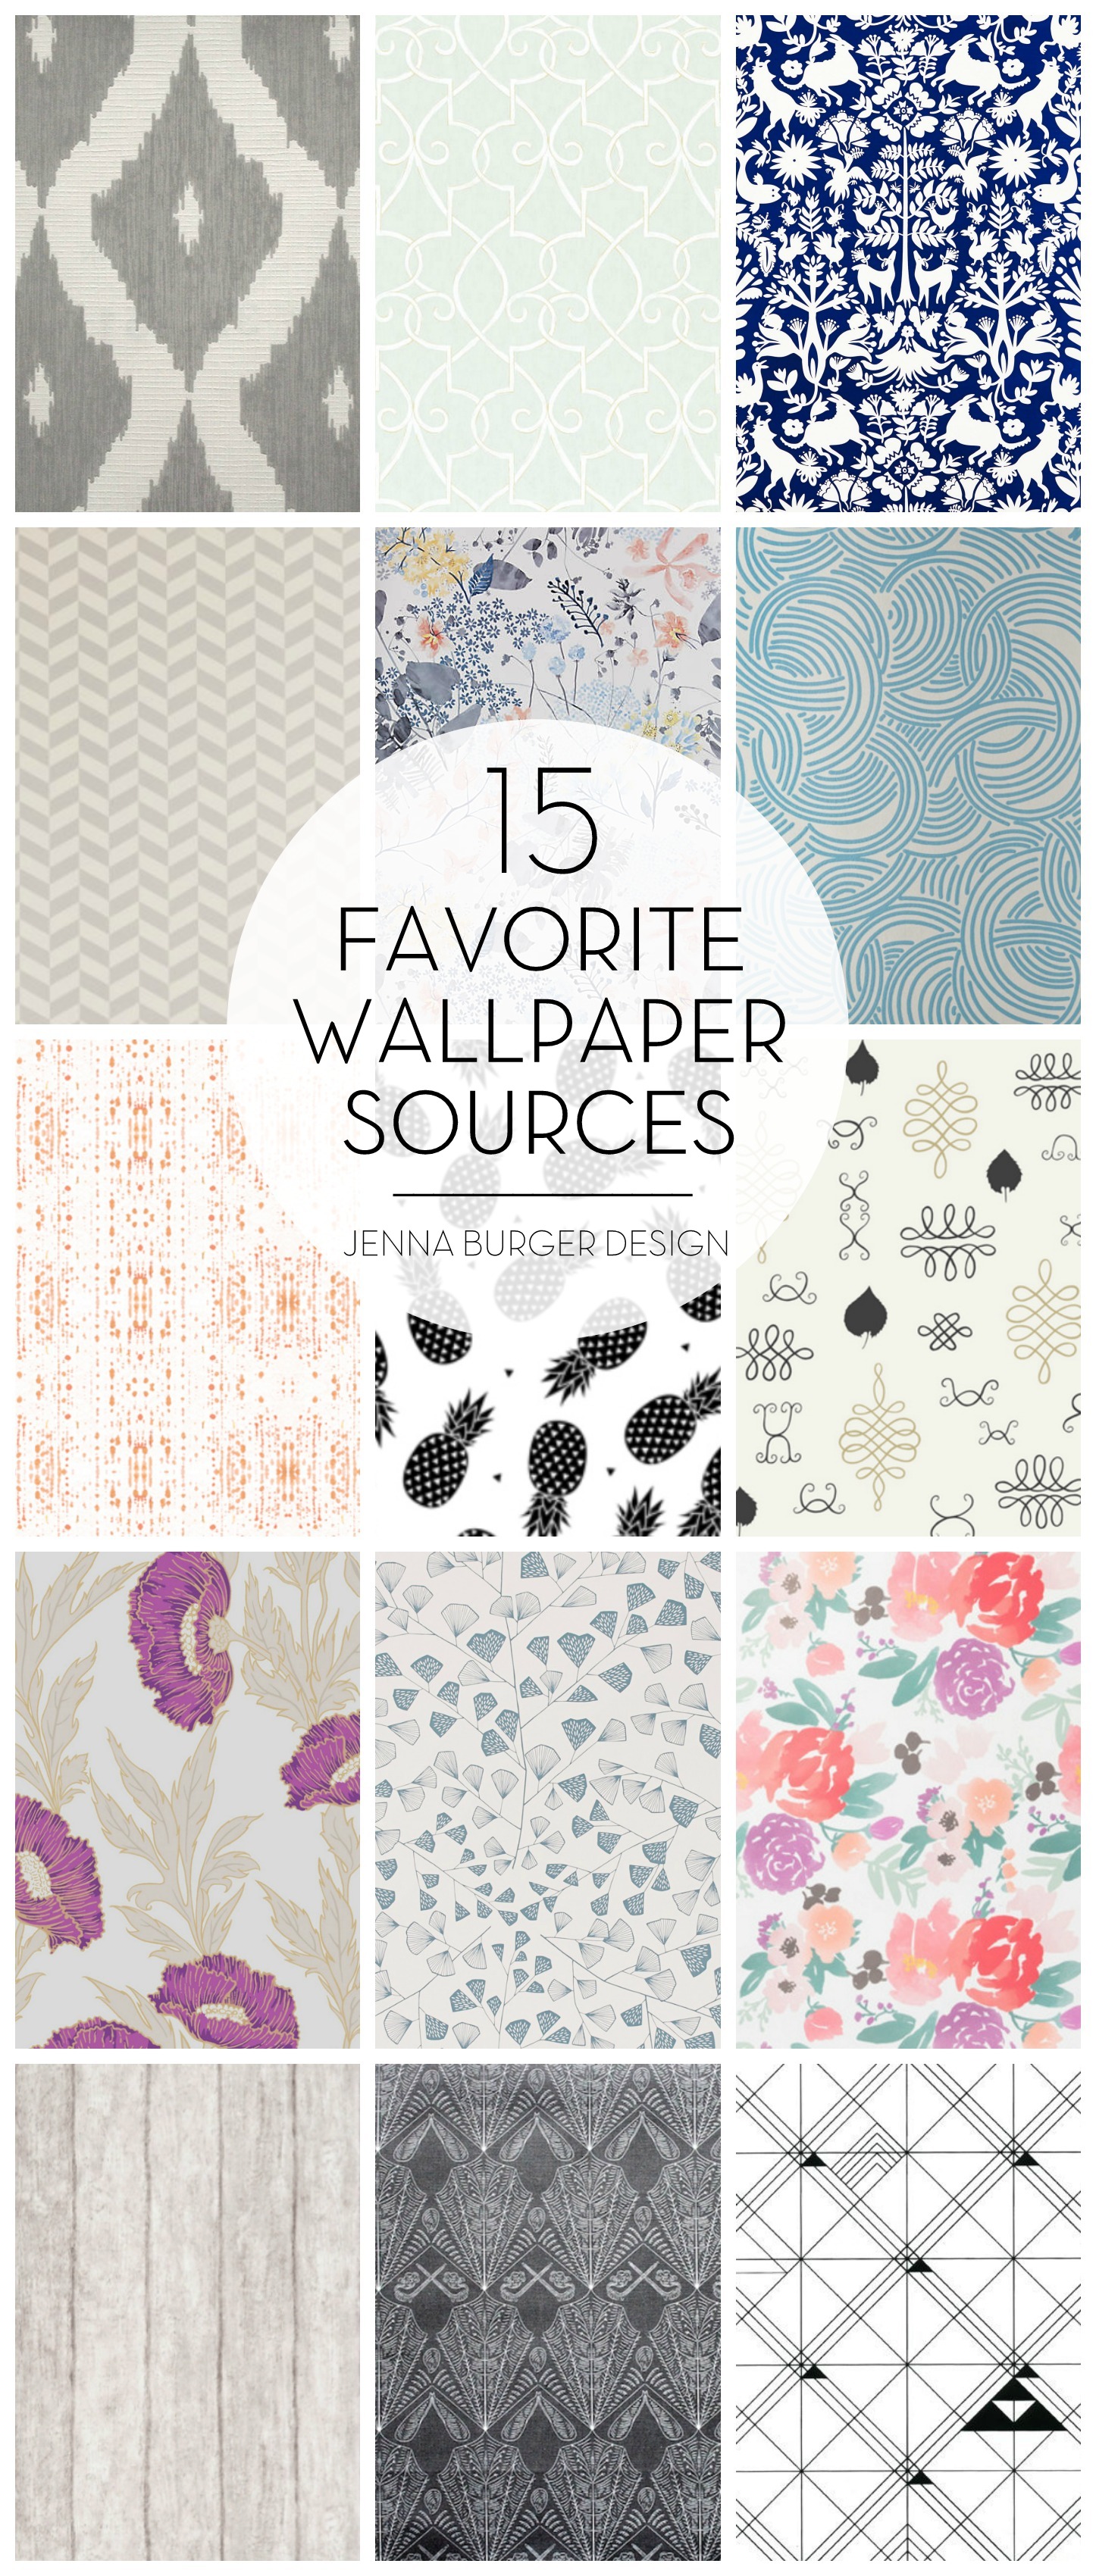 15 Favorite Sources for Wallpaper!